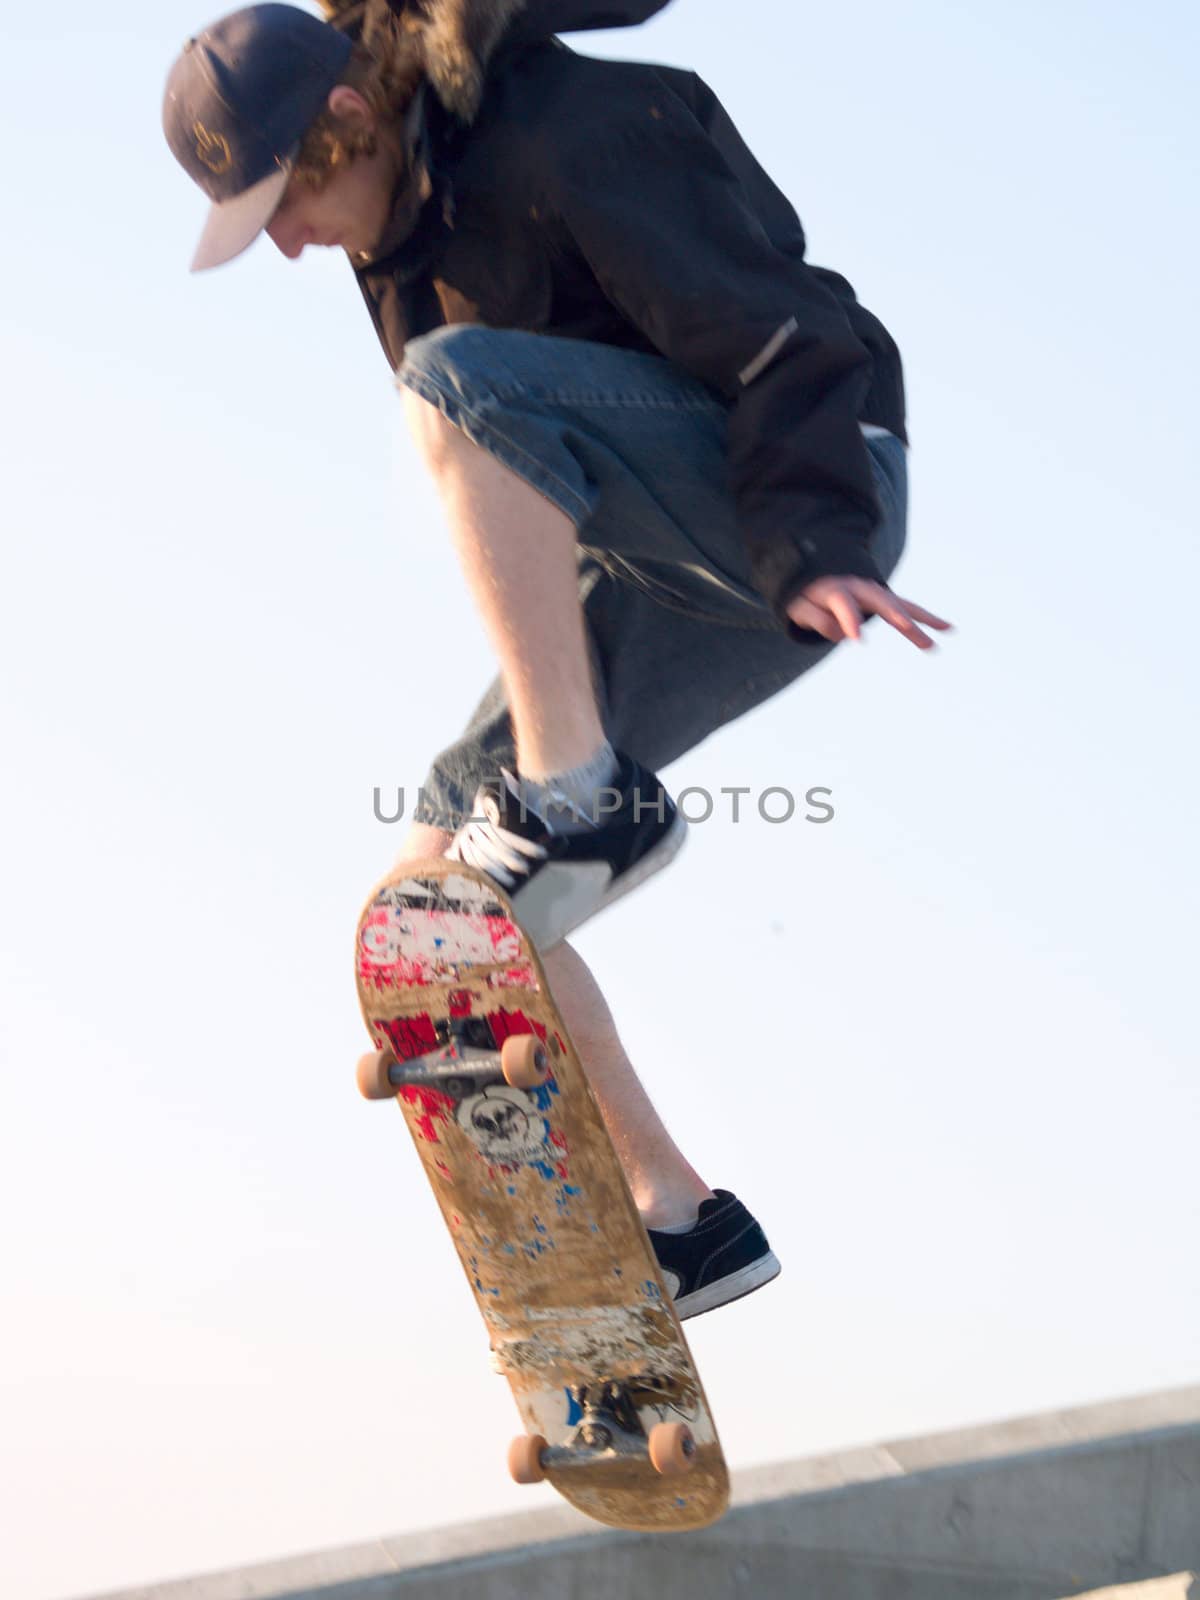 Young skateboarder getting some air on his skate board